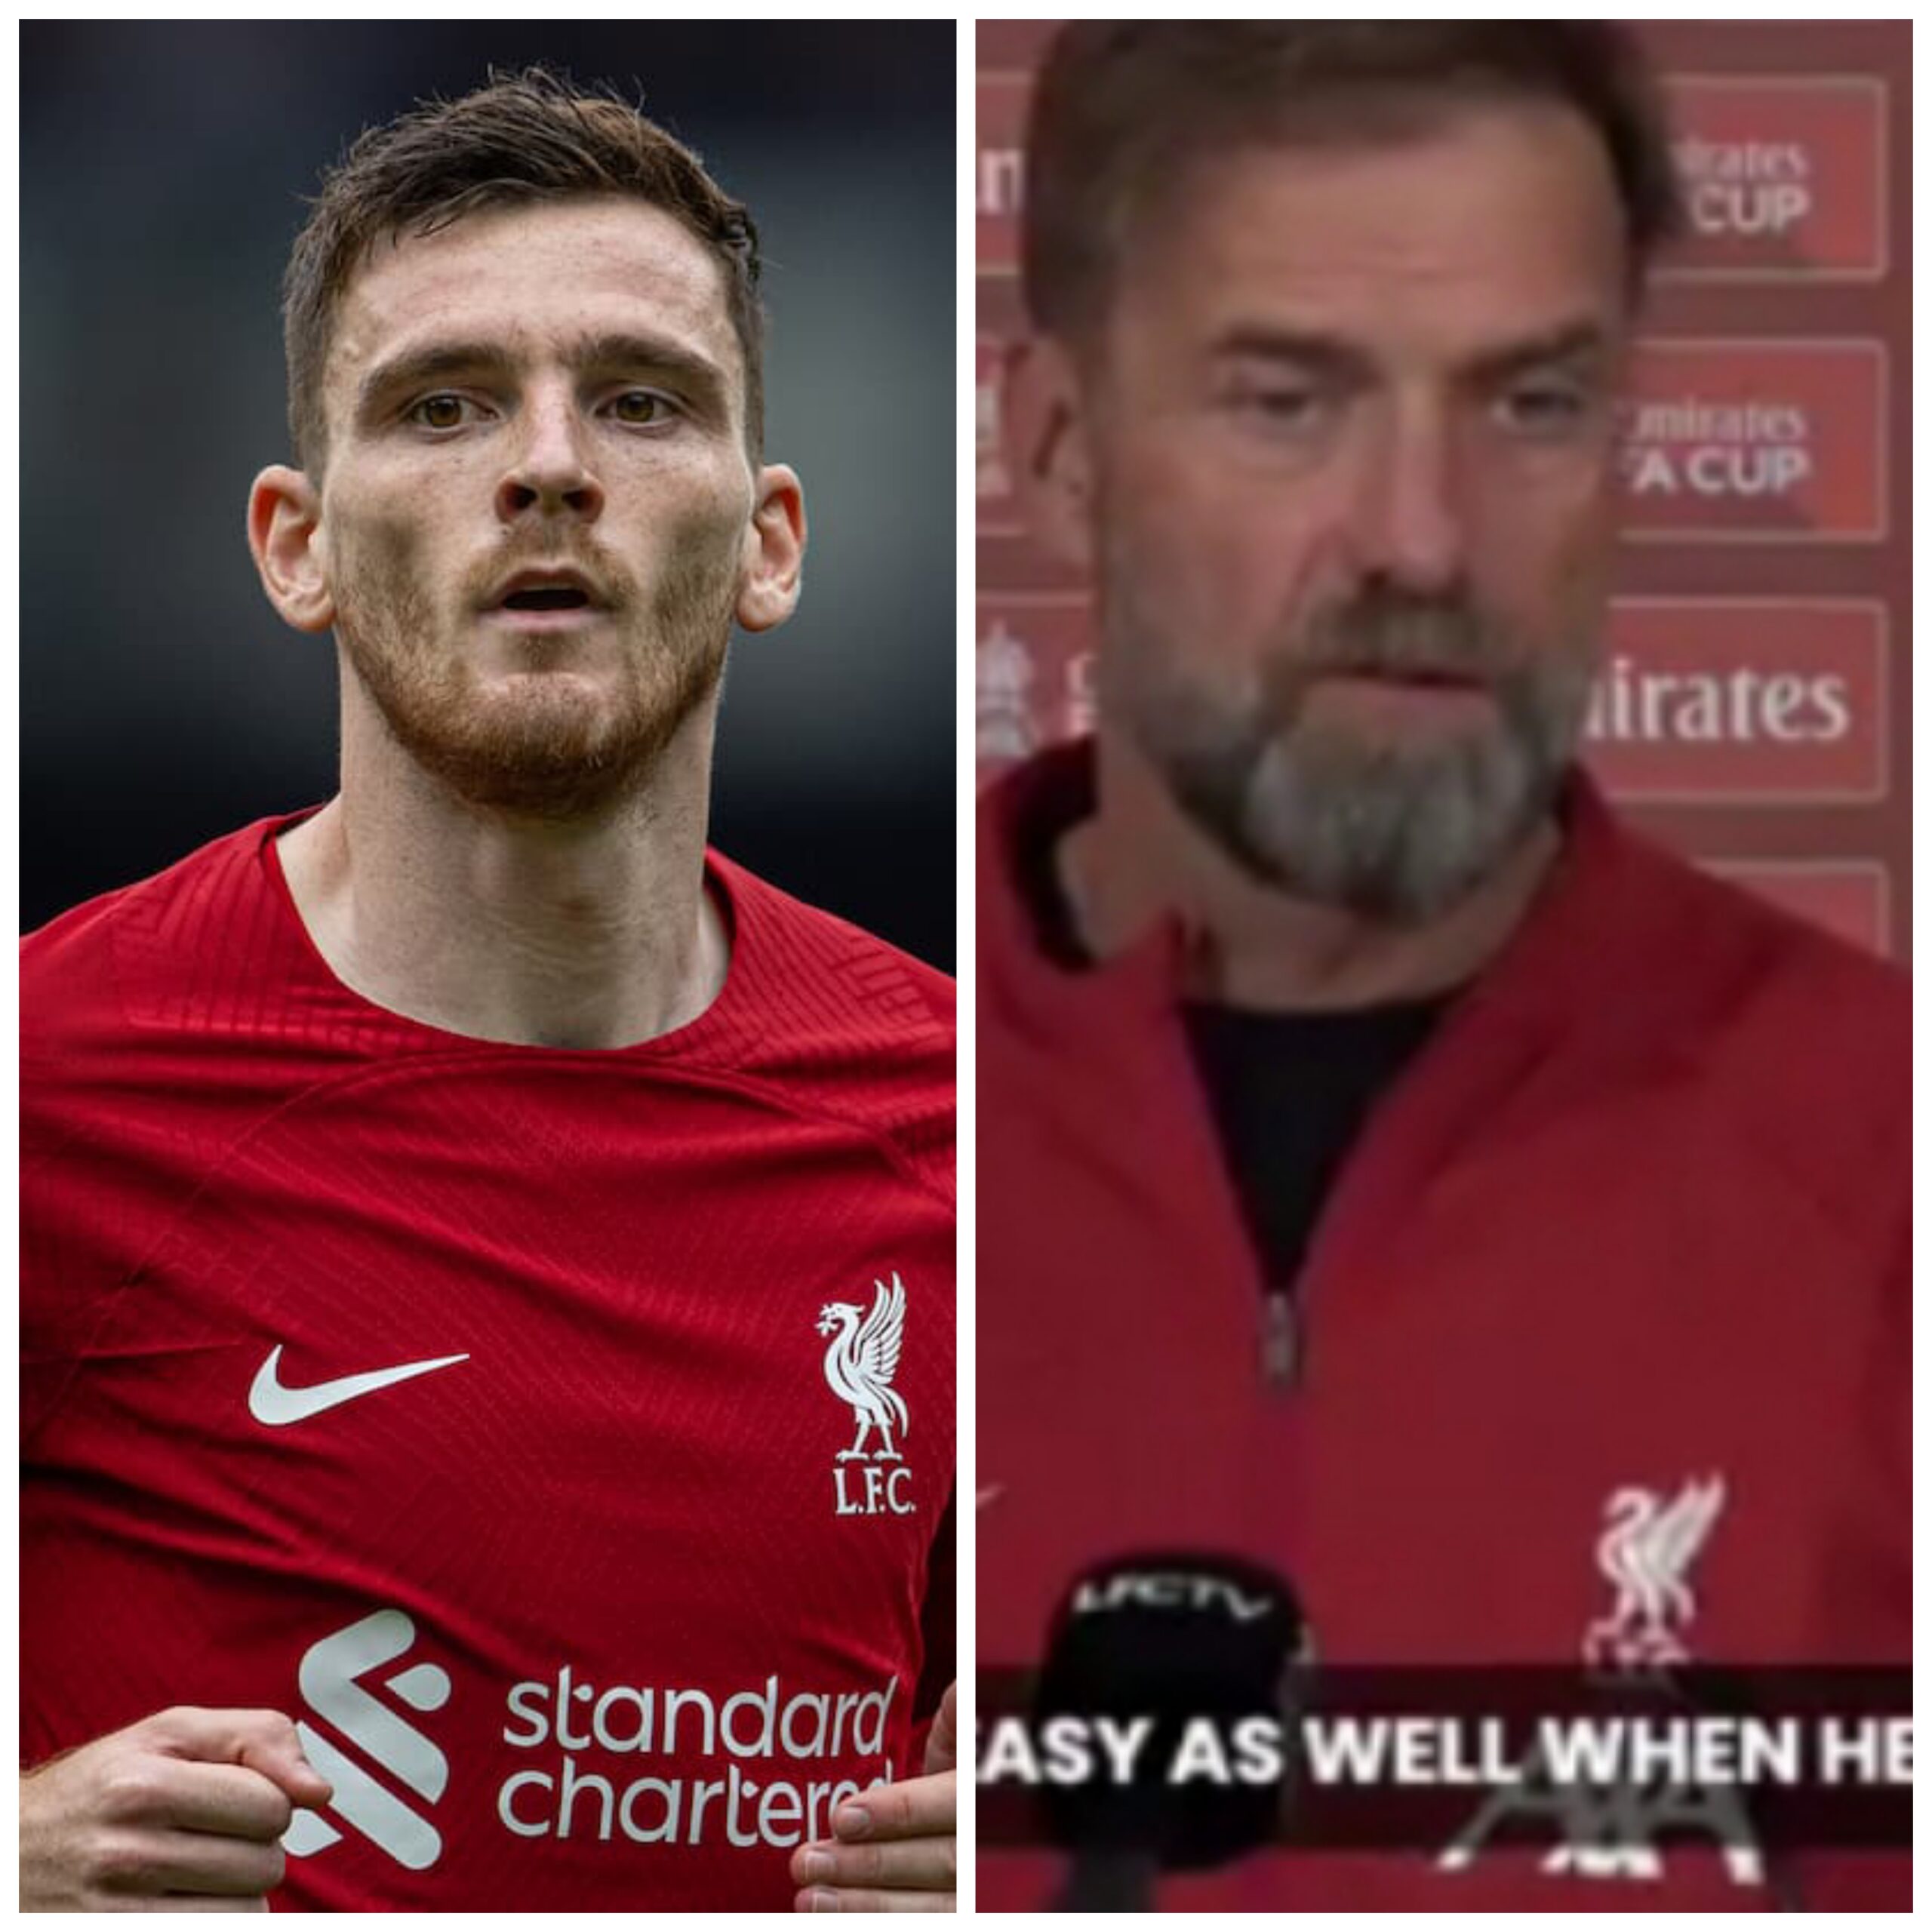 "Not True"-Jurgen Klopp reacts to Andy Robertson's blunt claim that Liverpool are getting worse 15 Sportelo